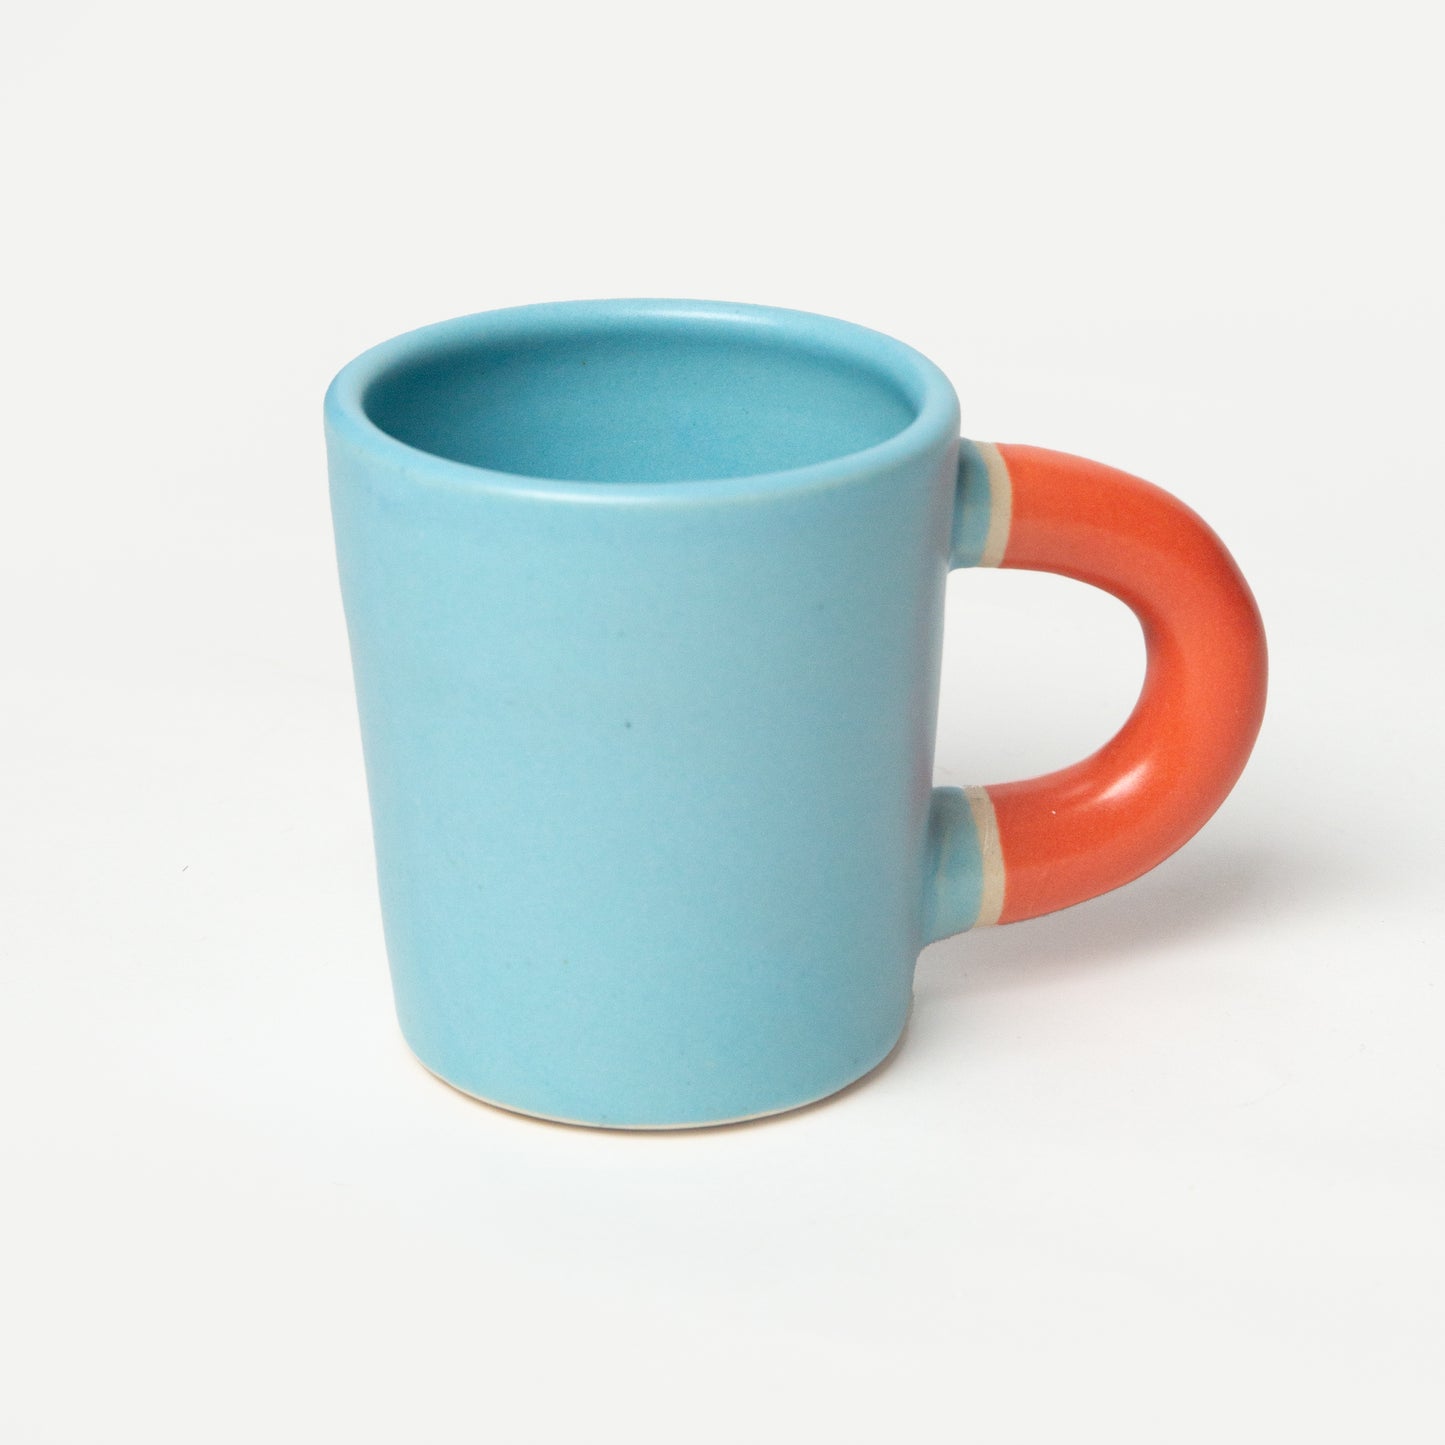 Favorite Mug in Sky Blue with Bright Red Handle